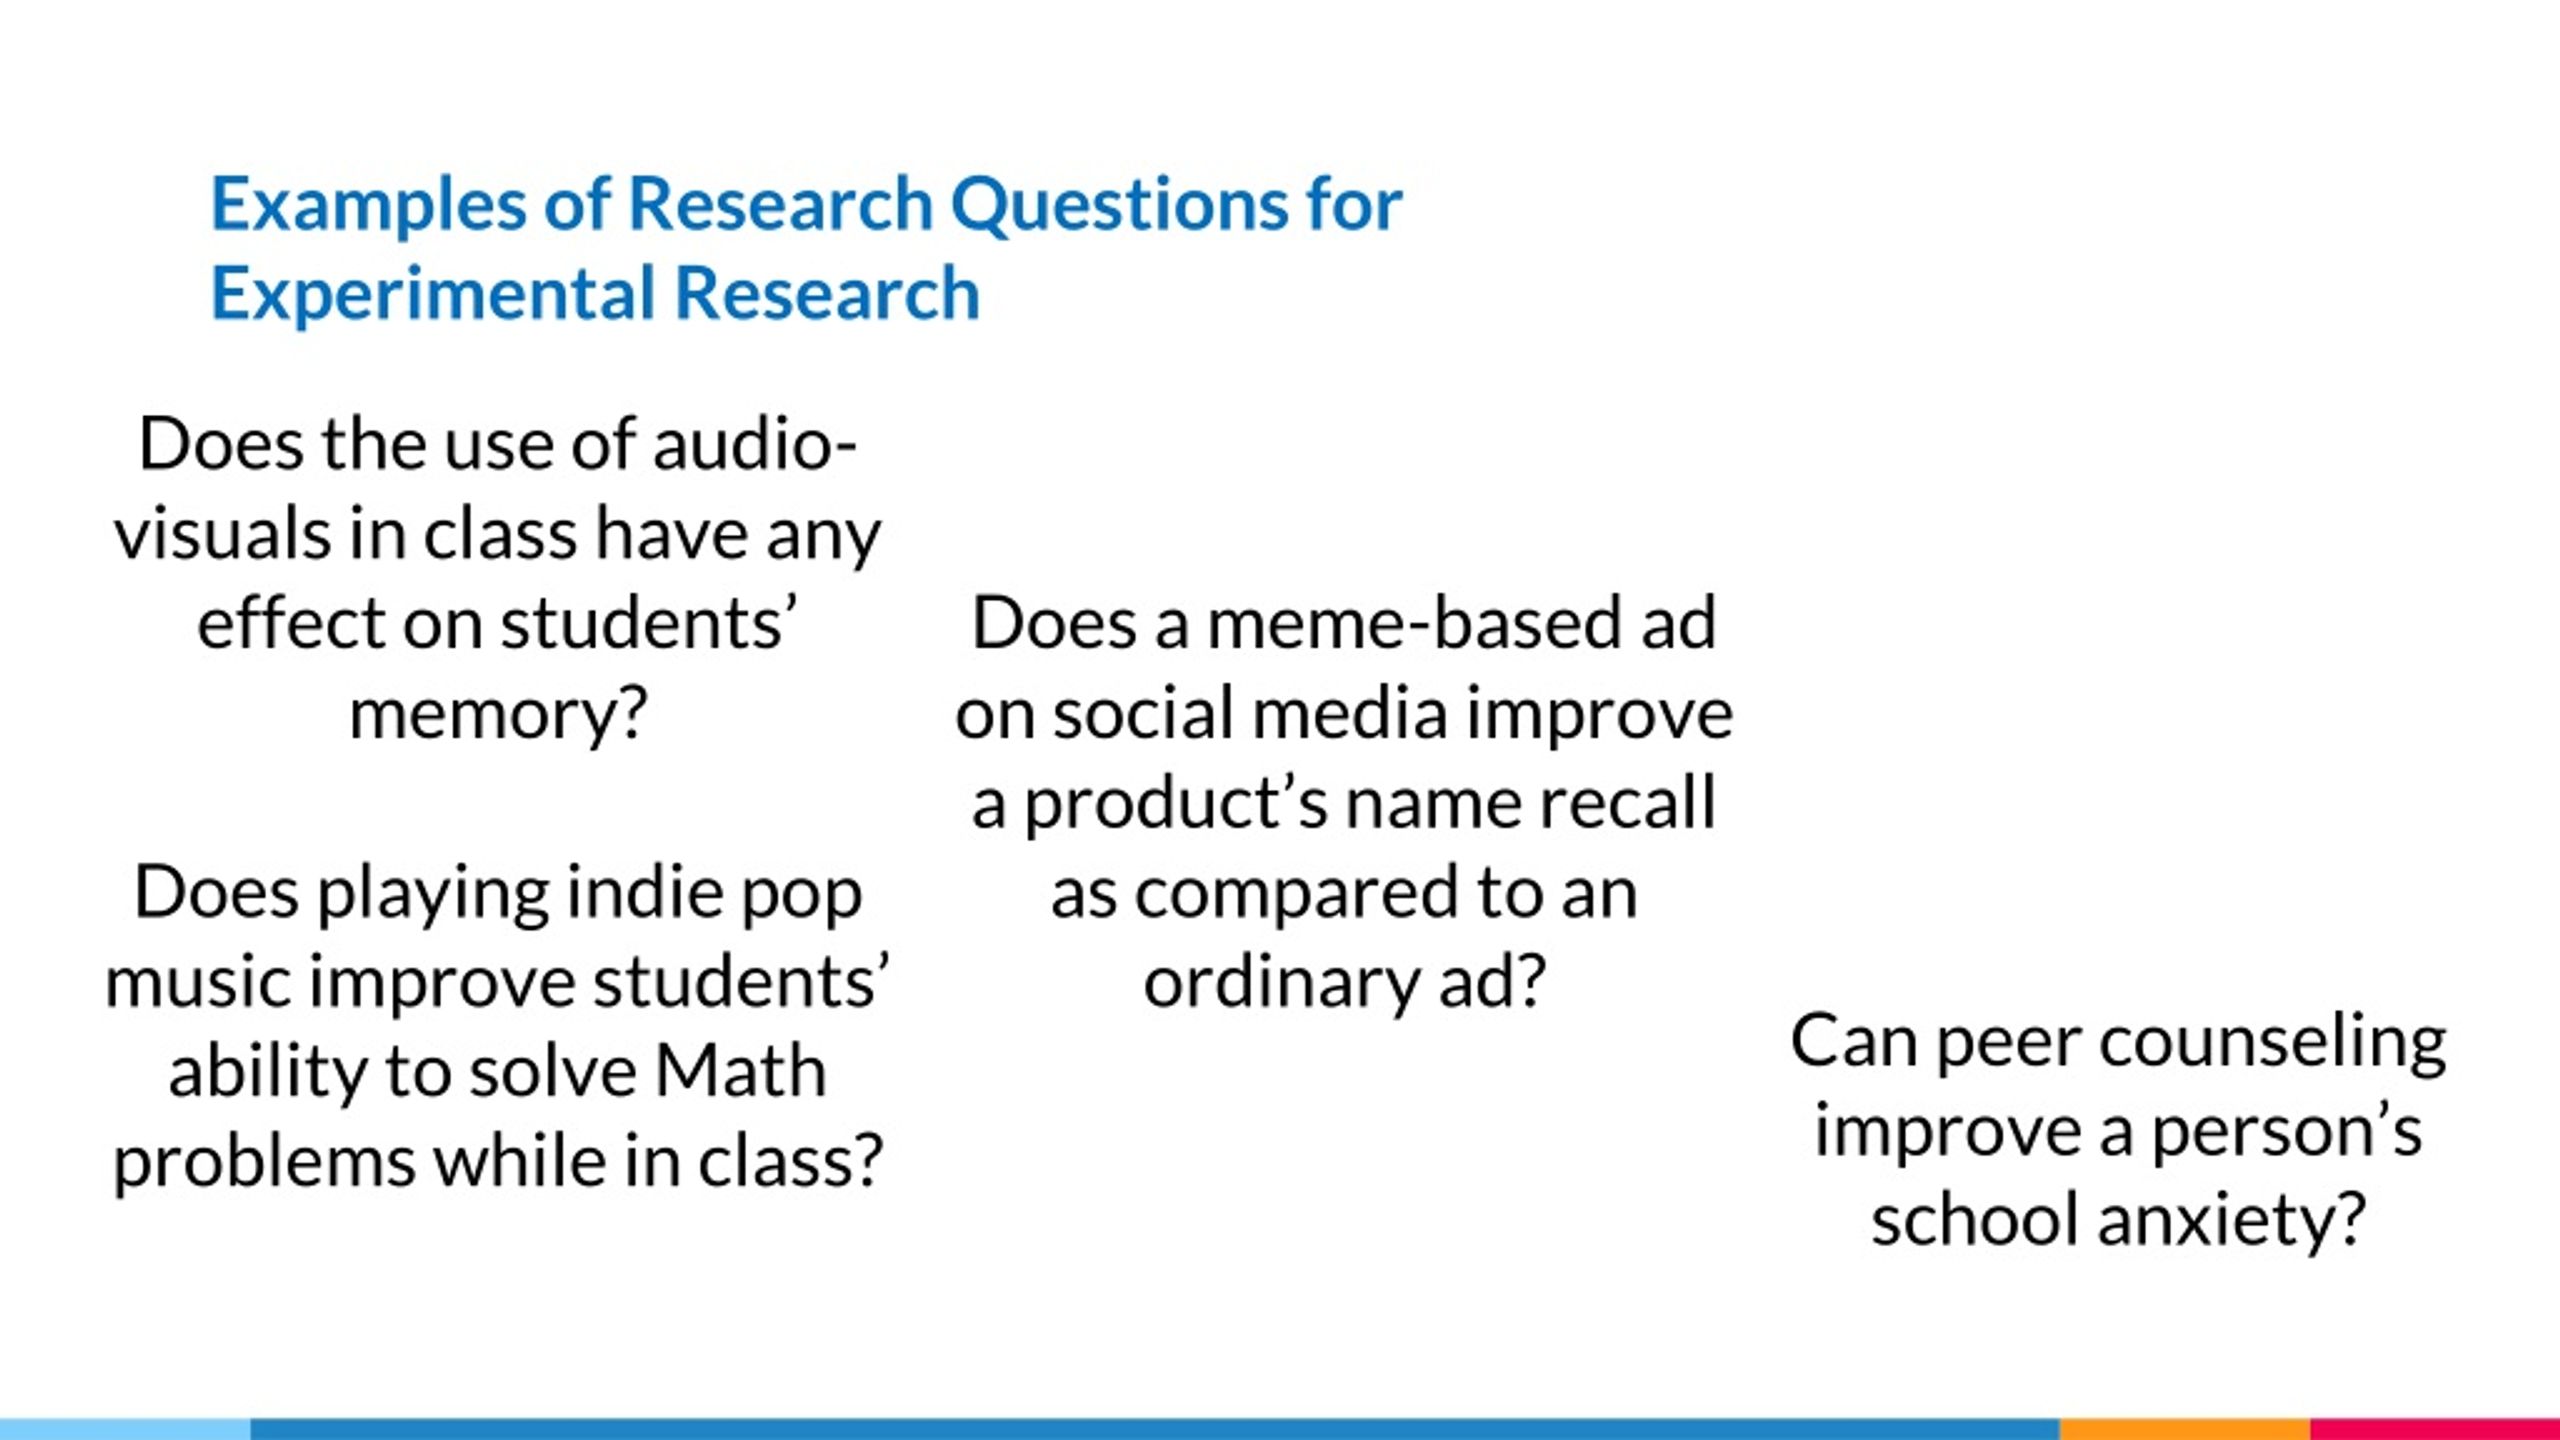 examples of experimental research questions in education